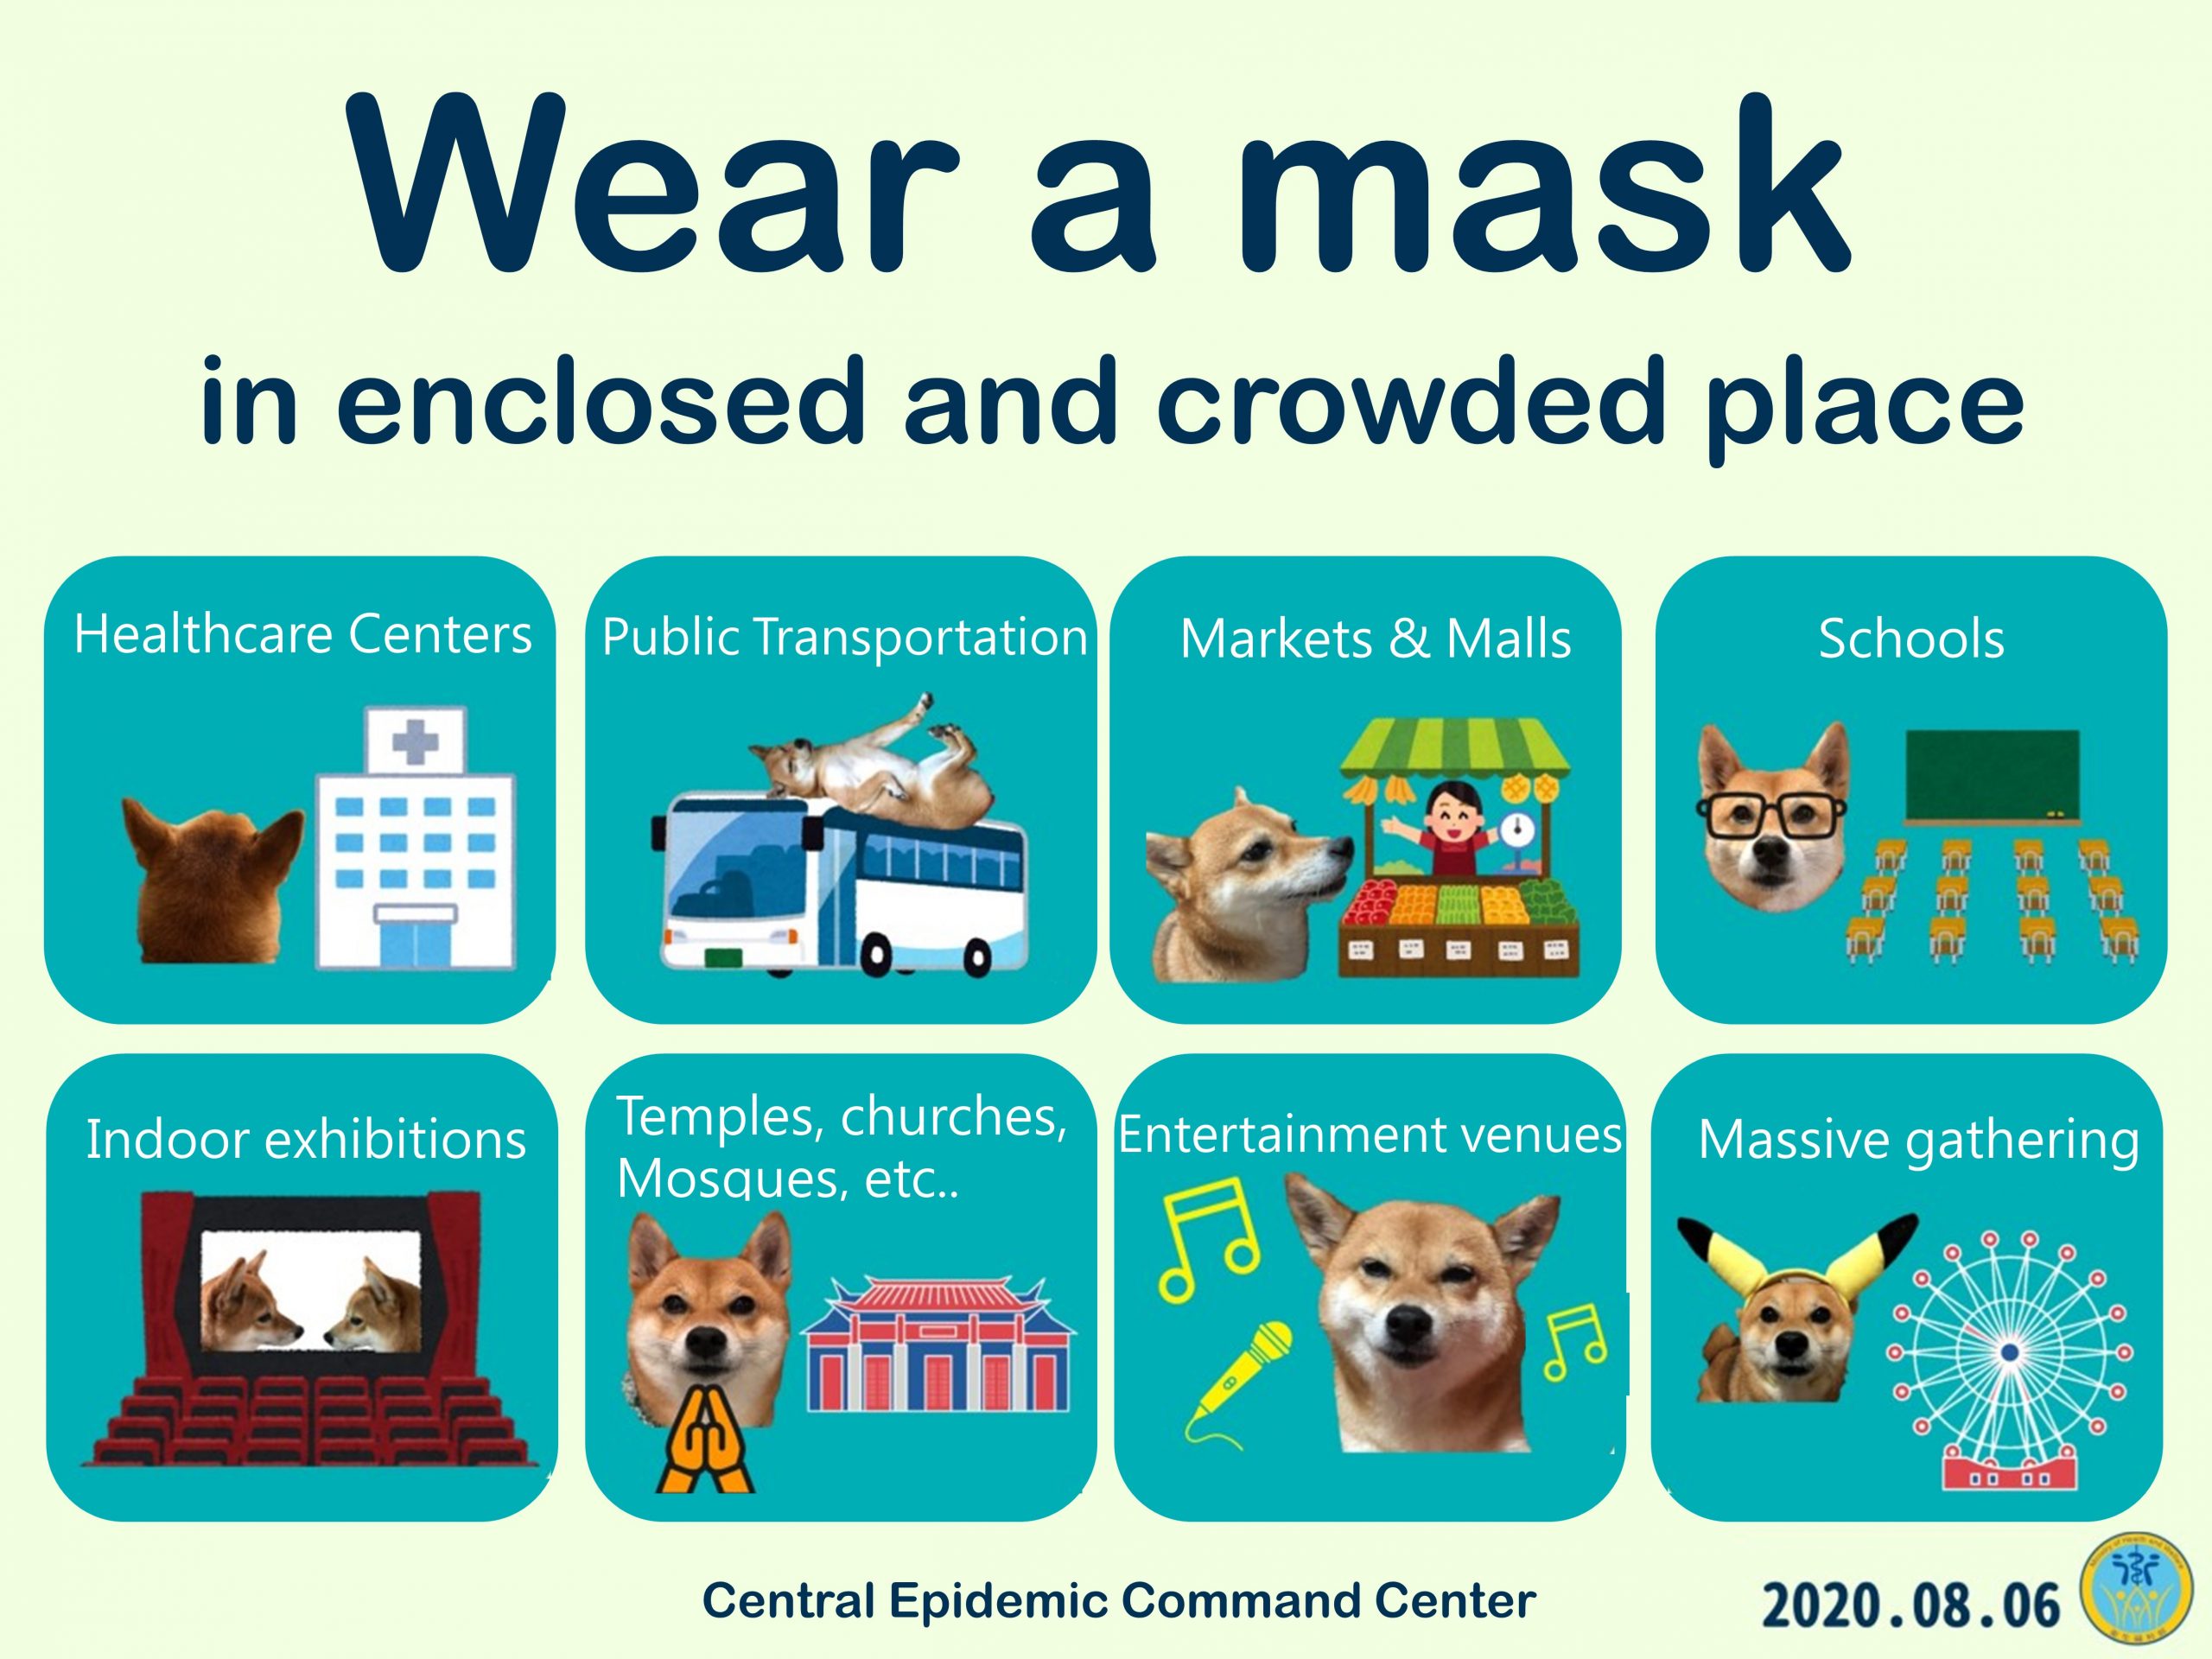 【COVID-19】Wear a mask in enclosed and crowded place